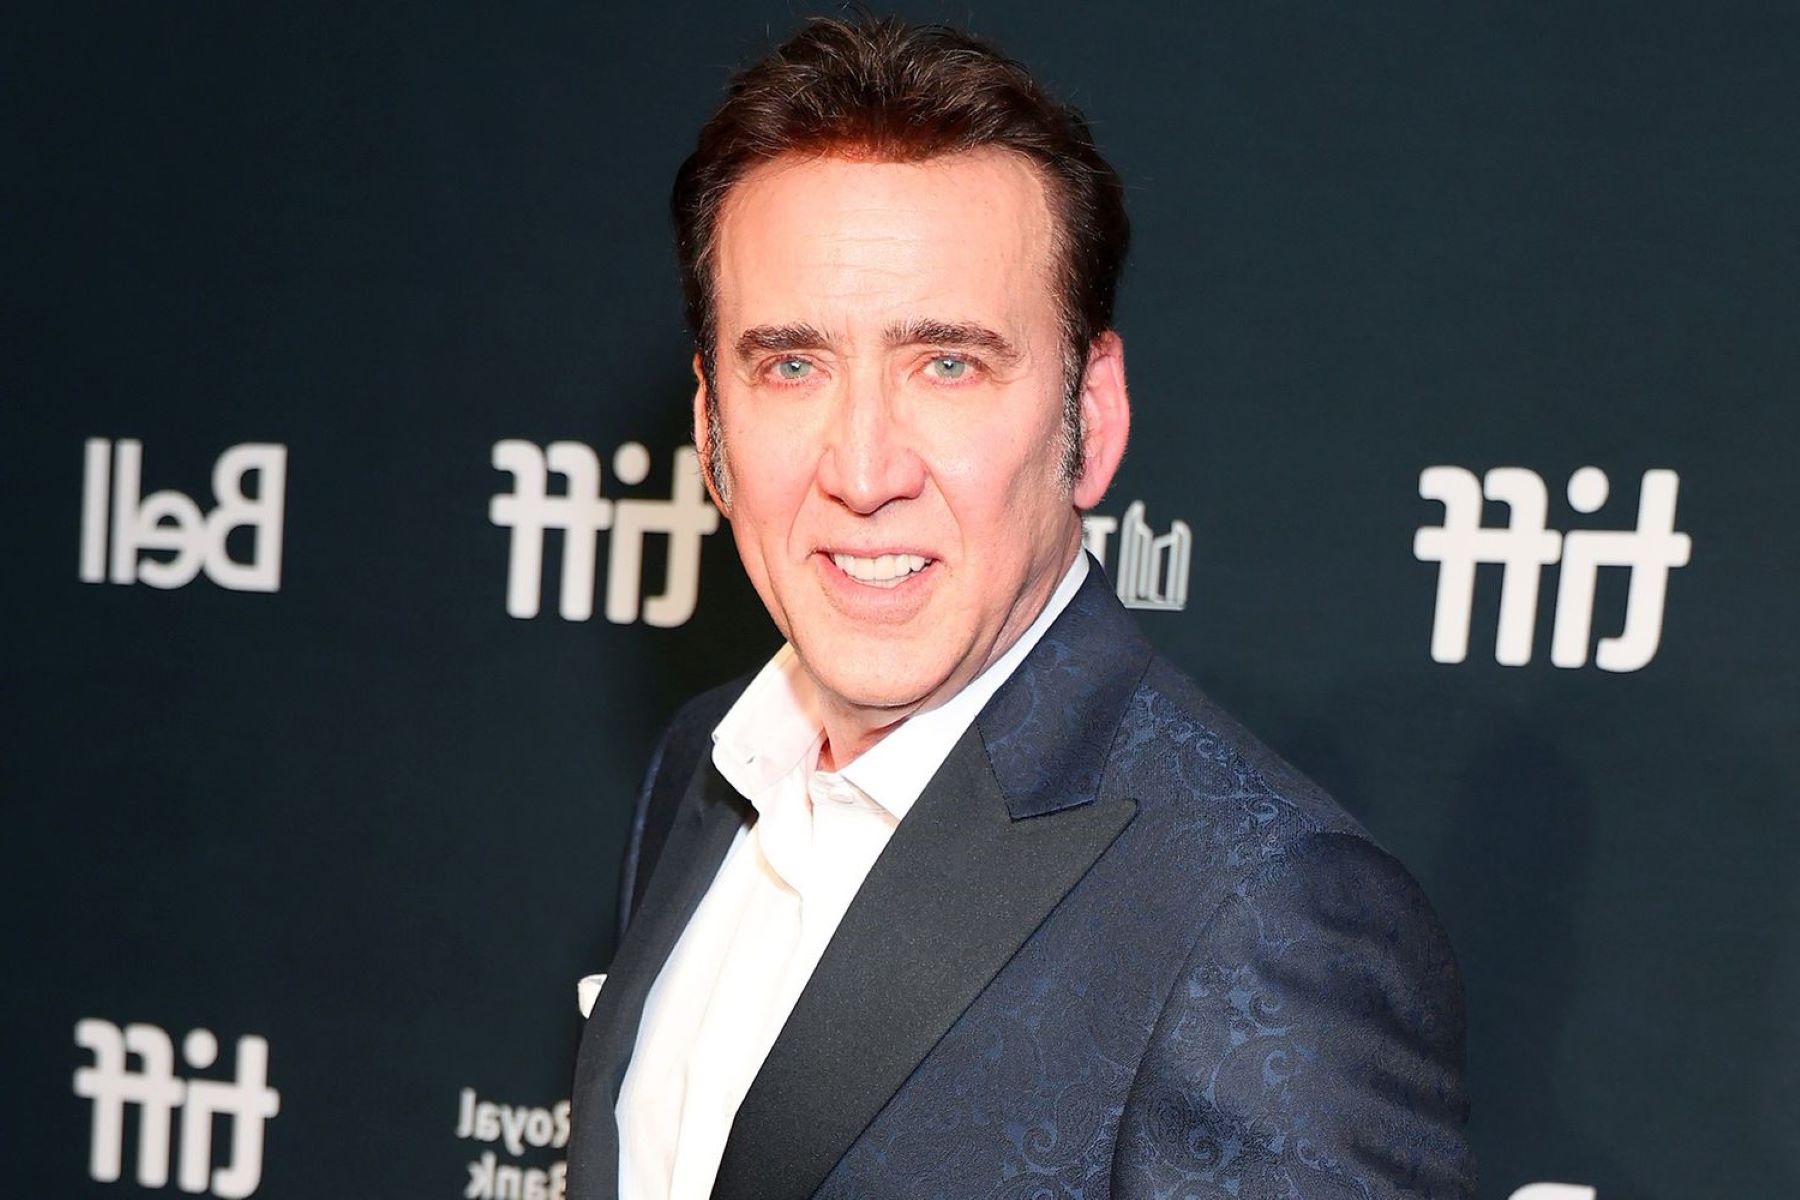 Nicholas Cage's Son Has An Out-of-this-World Name - You Won't Believe It!